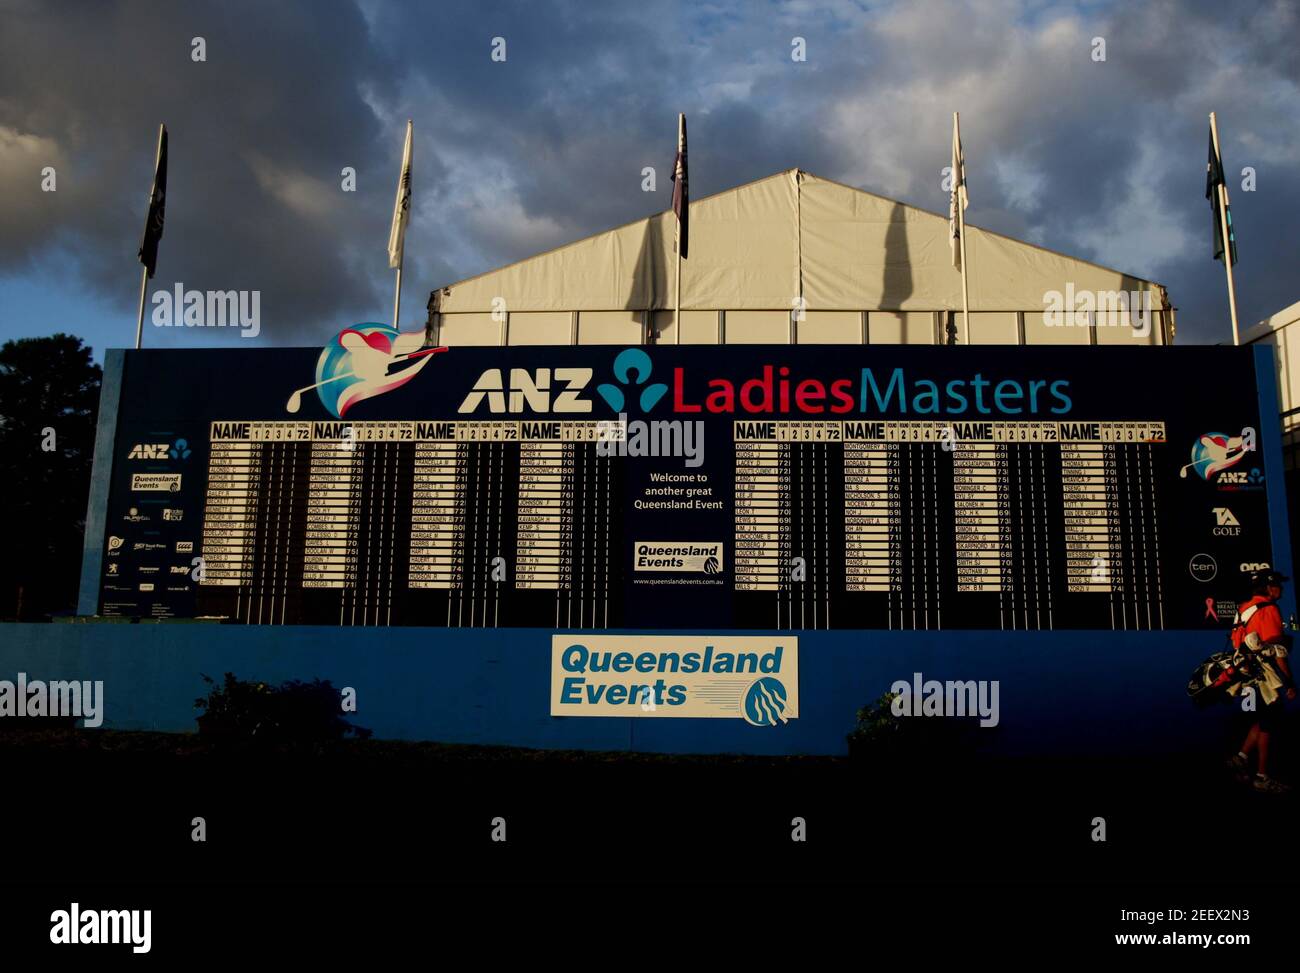 Golf - ANZ Ladies - RACV Royal Pines Resort, Gold Coast, Queensland, Australia - 5/3/10 A general view of the scoreboard Mandatory Credit: Action Images / Jason O'Brien Livepic Photo - Alamy